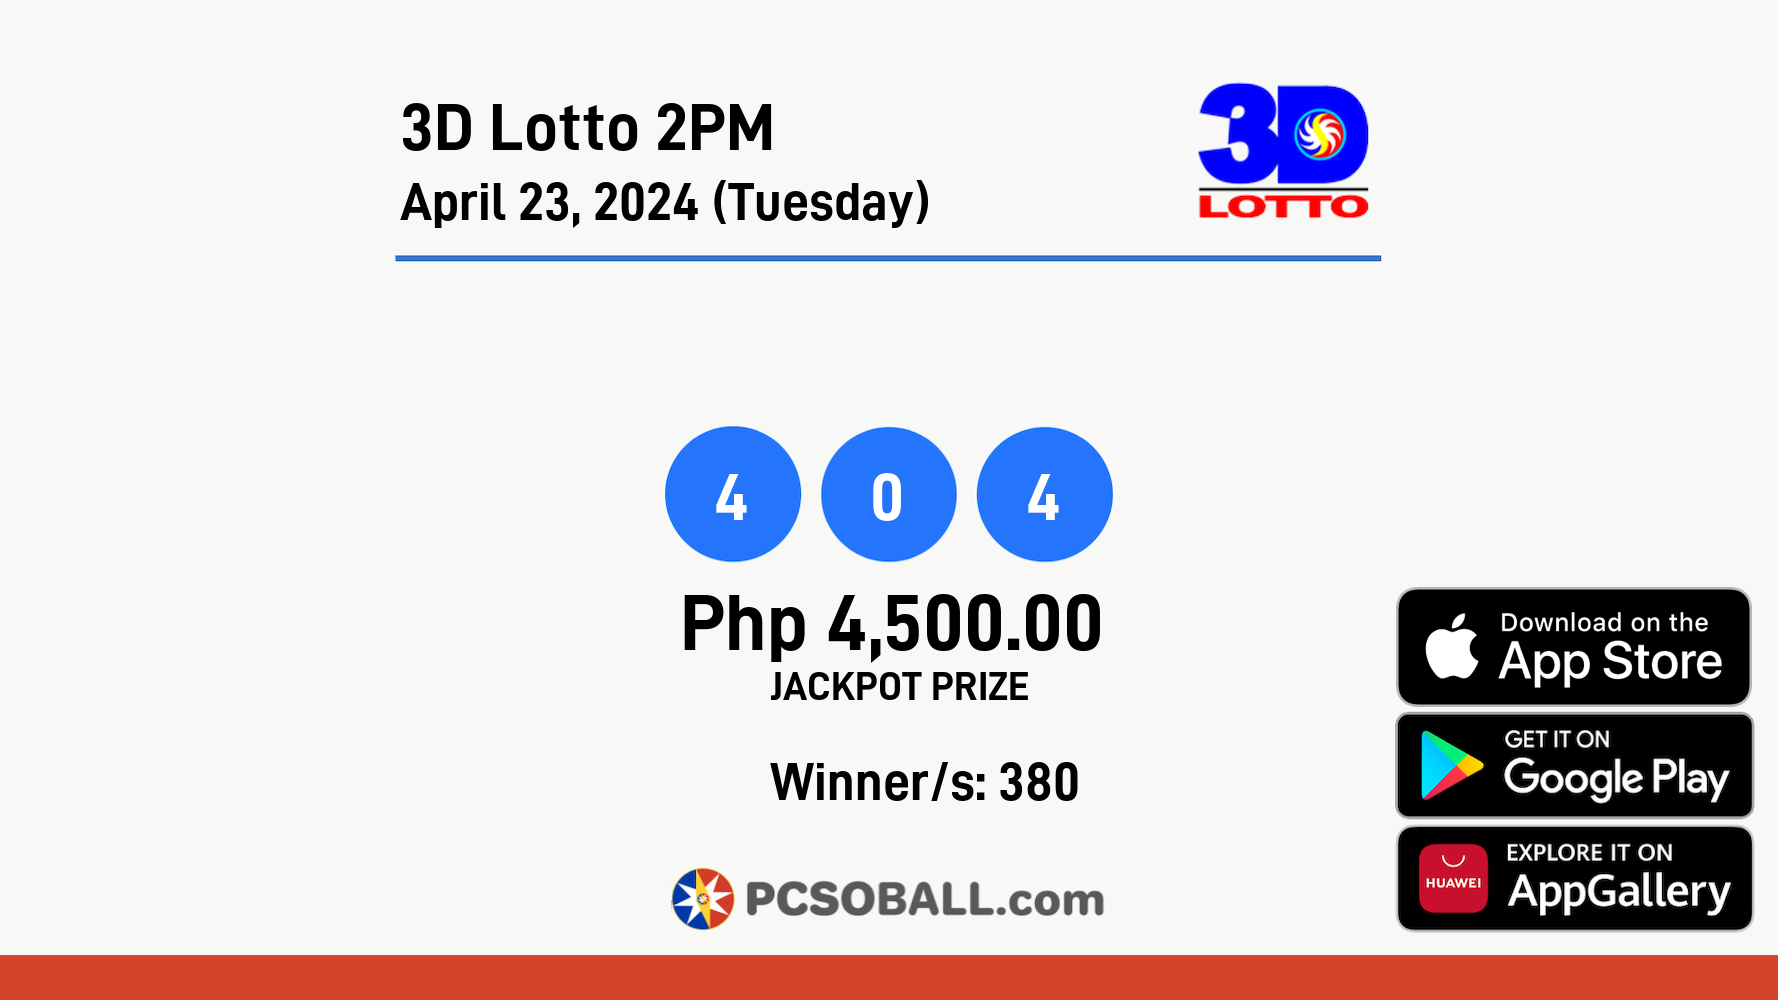 3D Lotto 2PM April 23, 2024 (Tuesday) Result